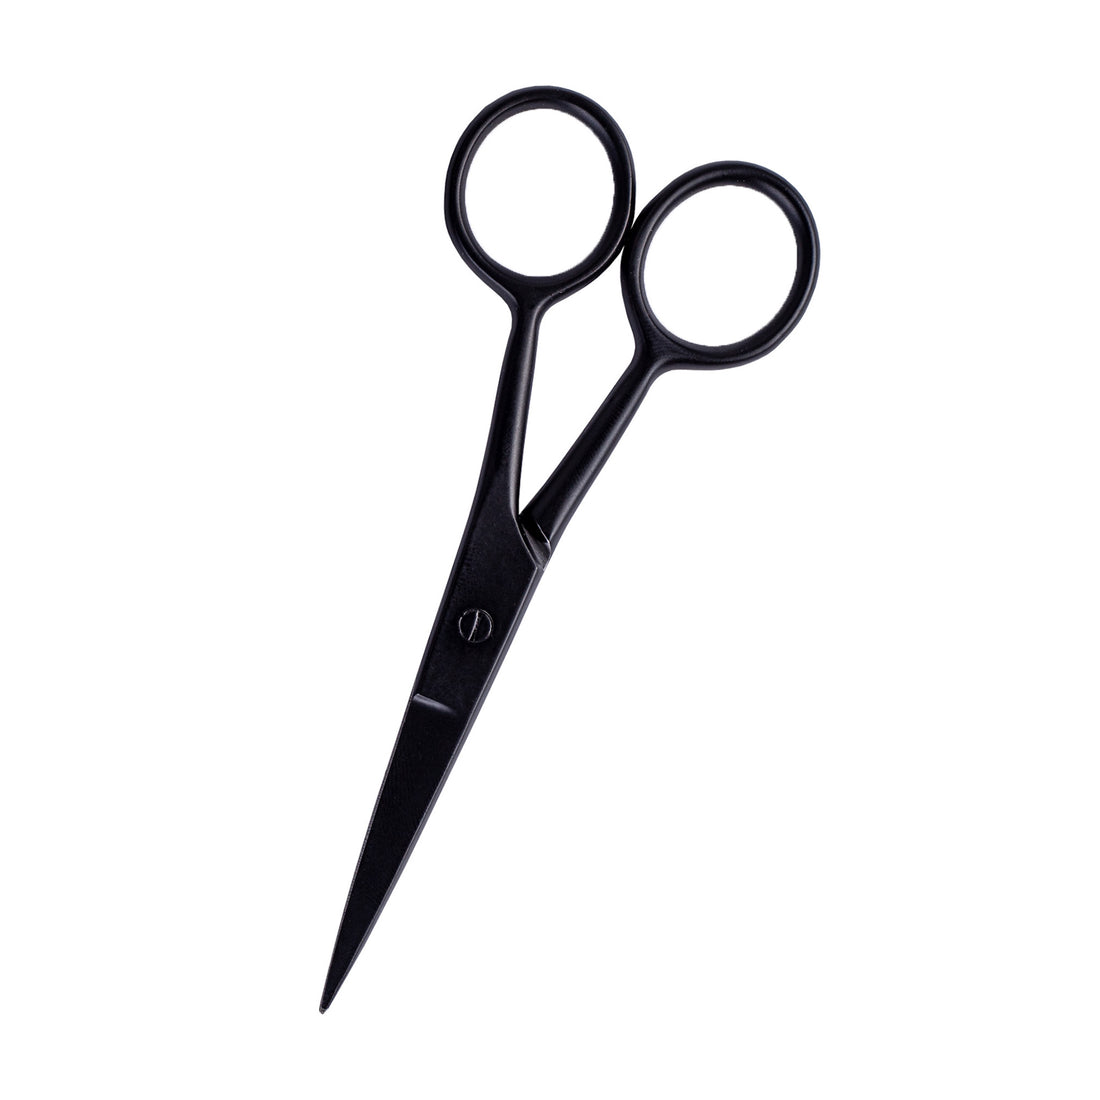 Small scissors for hand tied weft extensions, machine weft extensions, and hybrid weft extensions